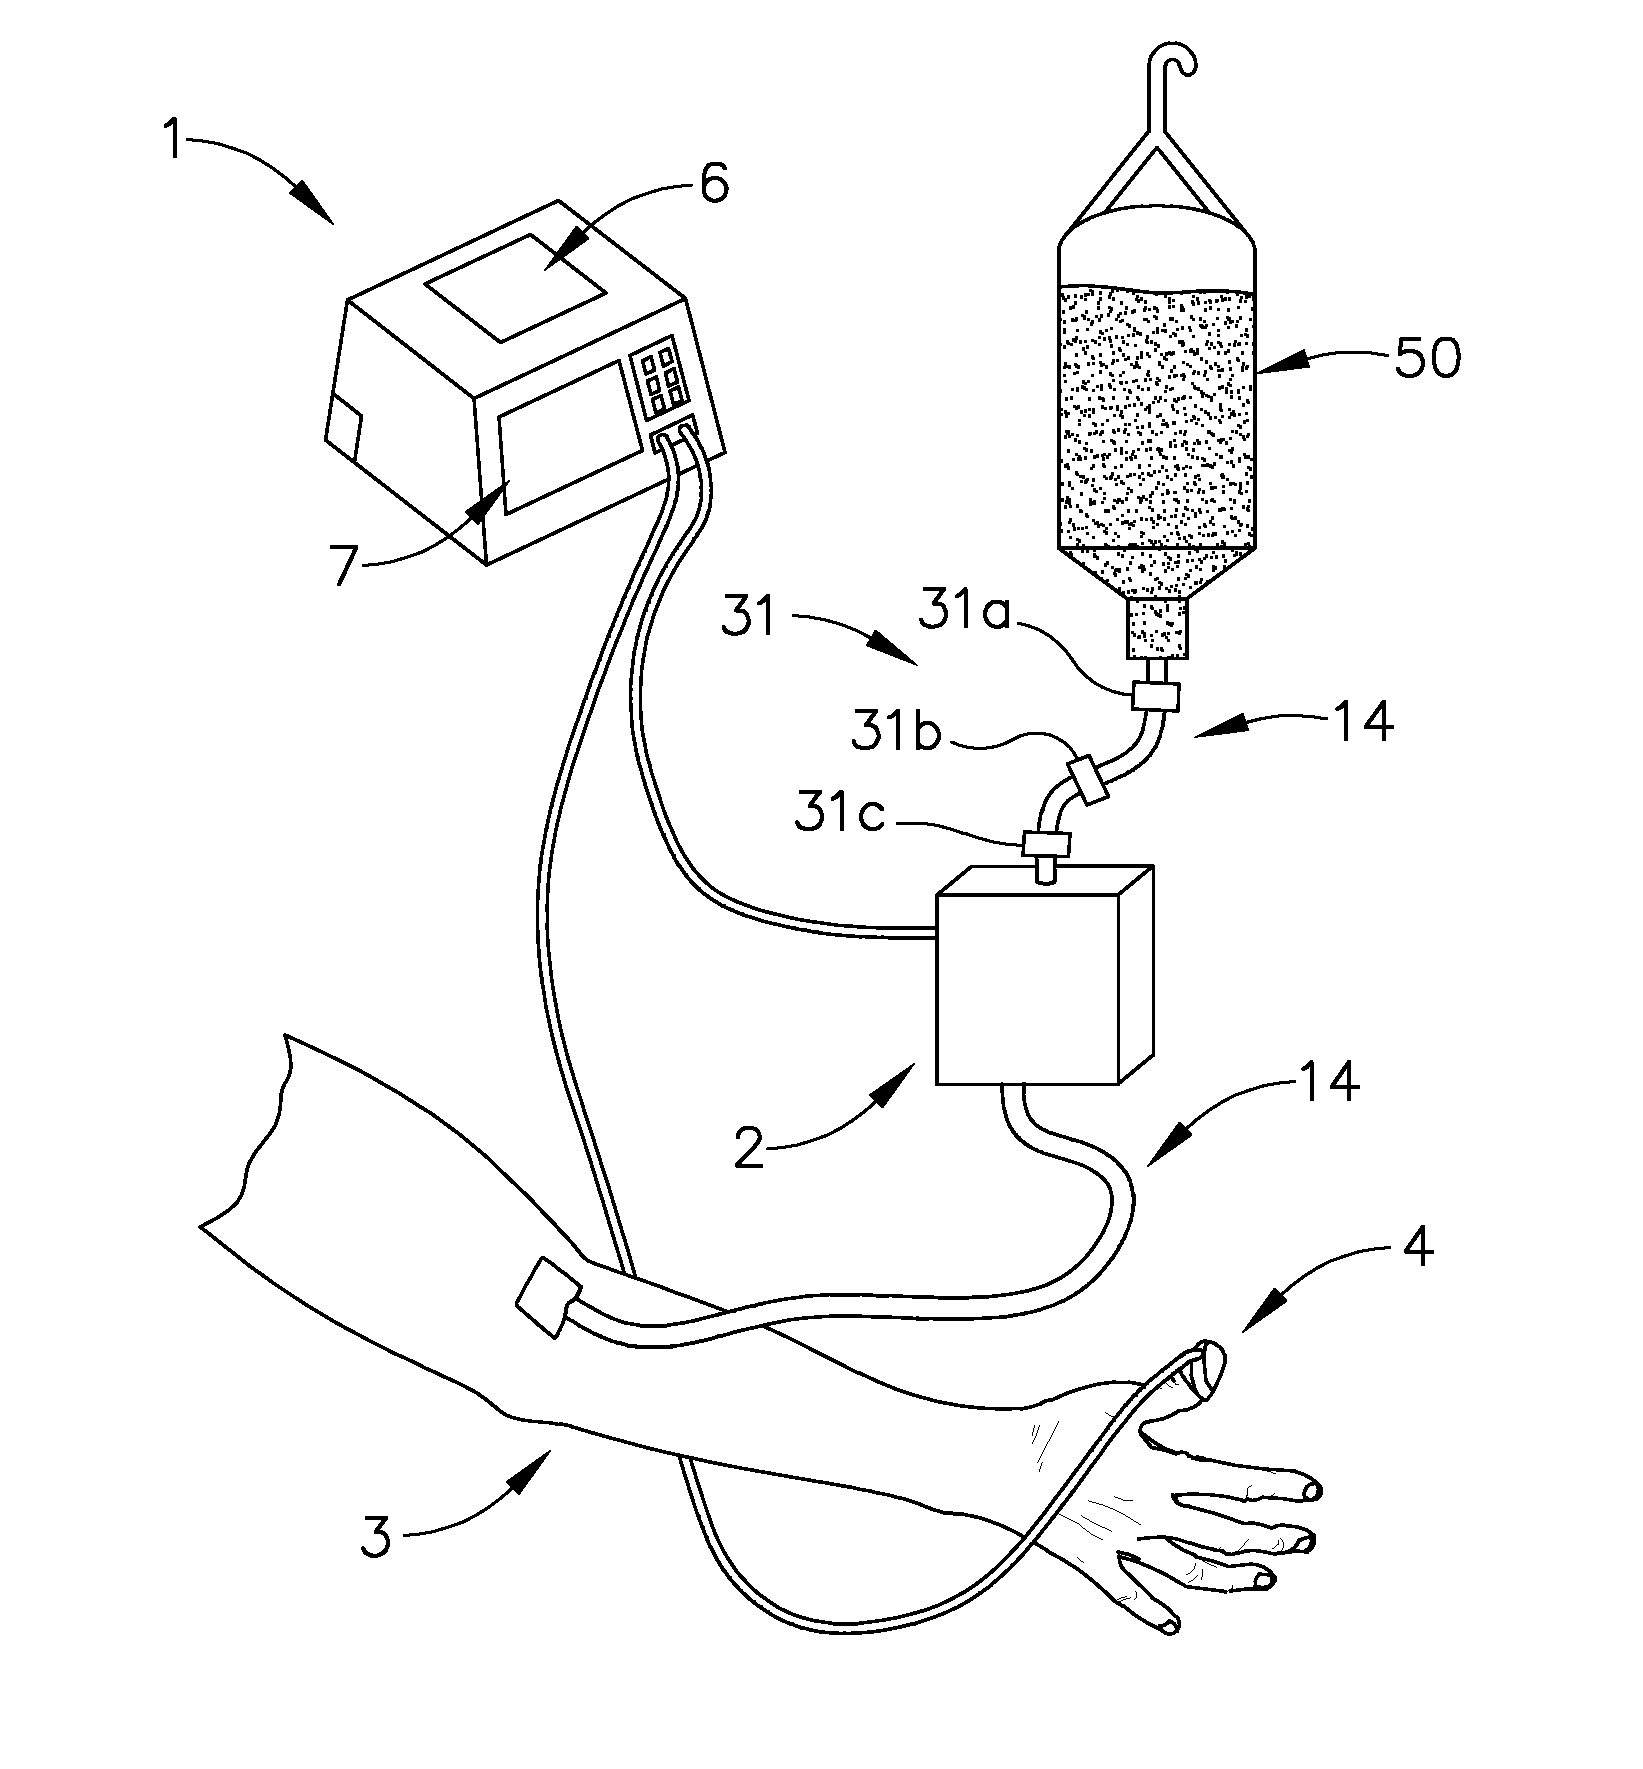 Apparatus and methods for controlling and automating fluid infusion activities